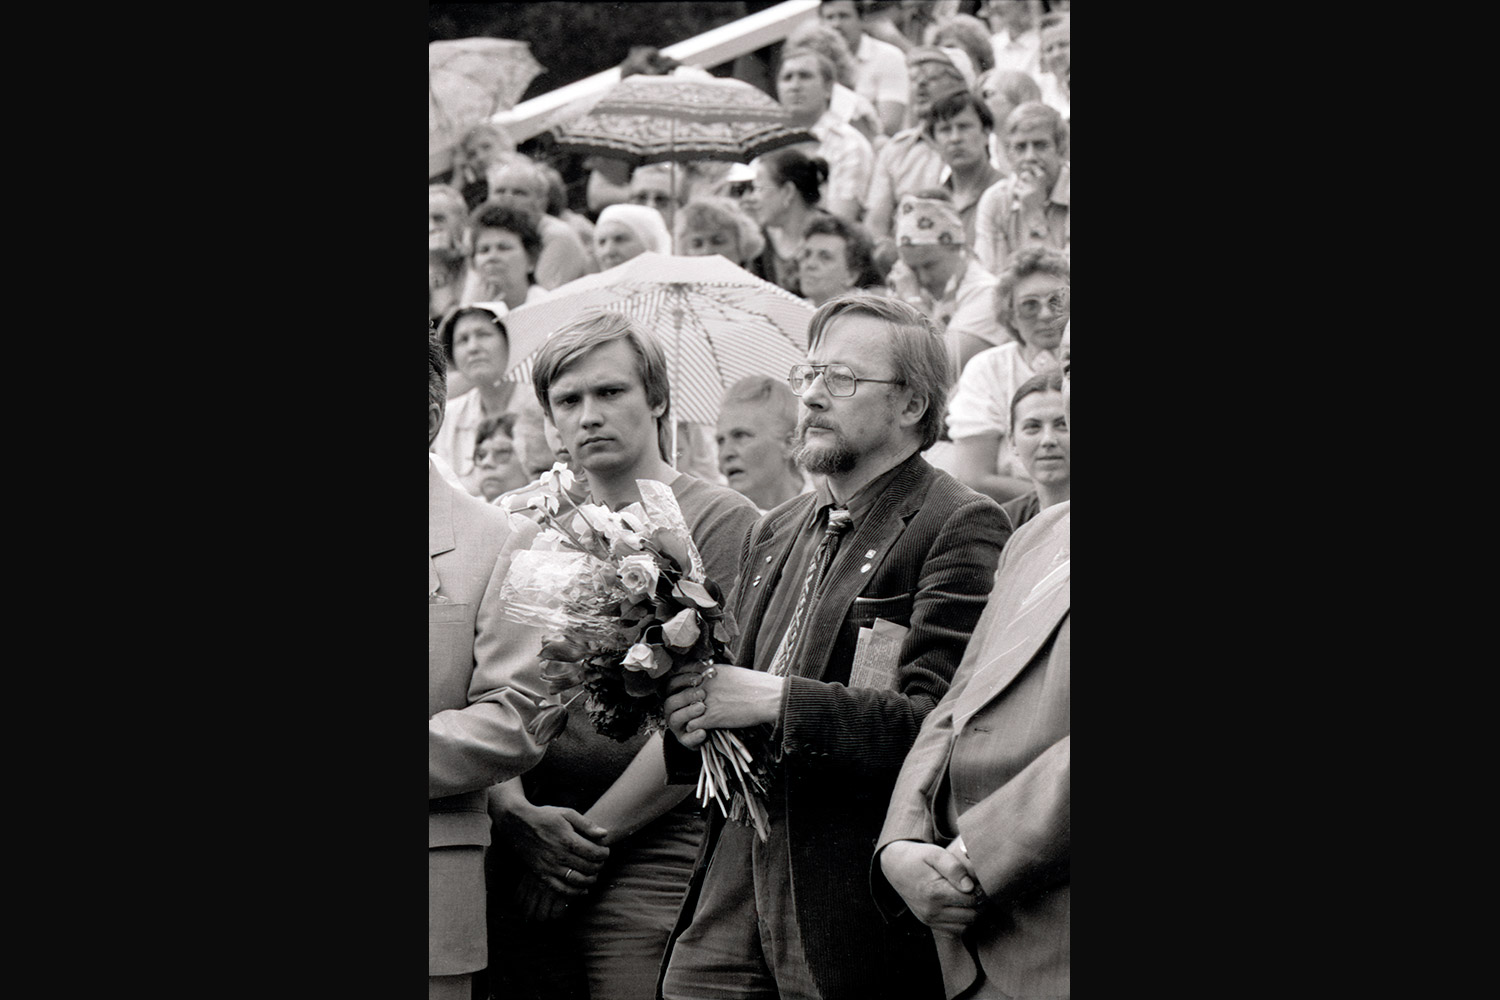 20/05/1989 – Rally in Kalnų Park – escort of newly elected USSR People’s Deputies to the first Congress in Moscow. LVCA, photographer J. Juknevičius.